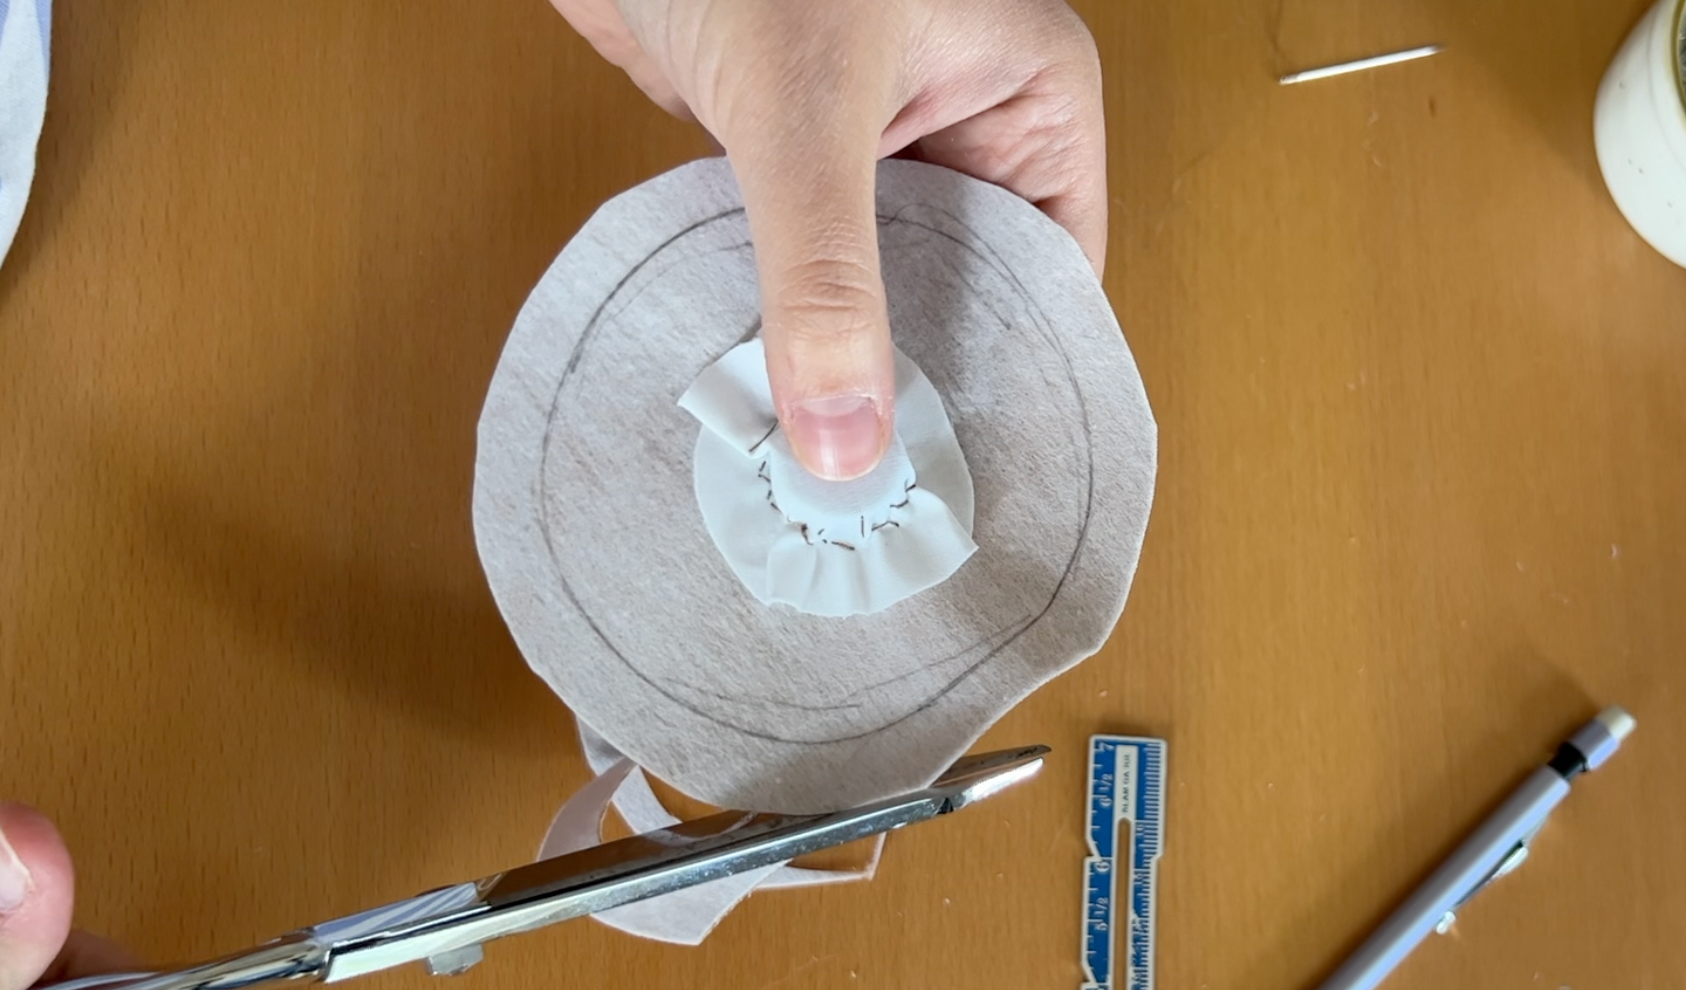 Stitching a magnet pocket to the brown circle